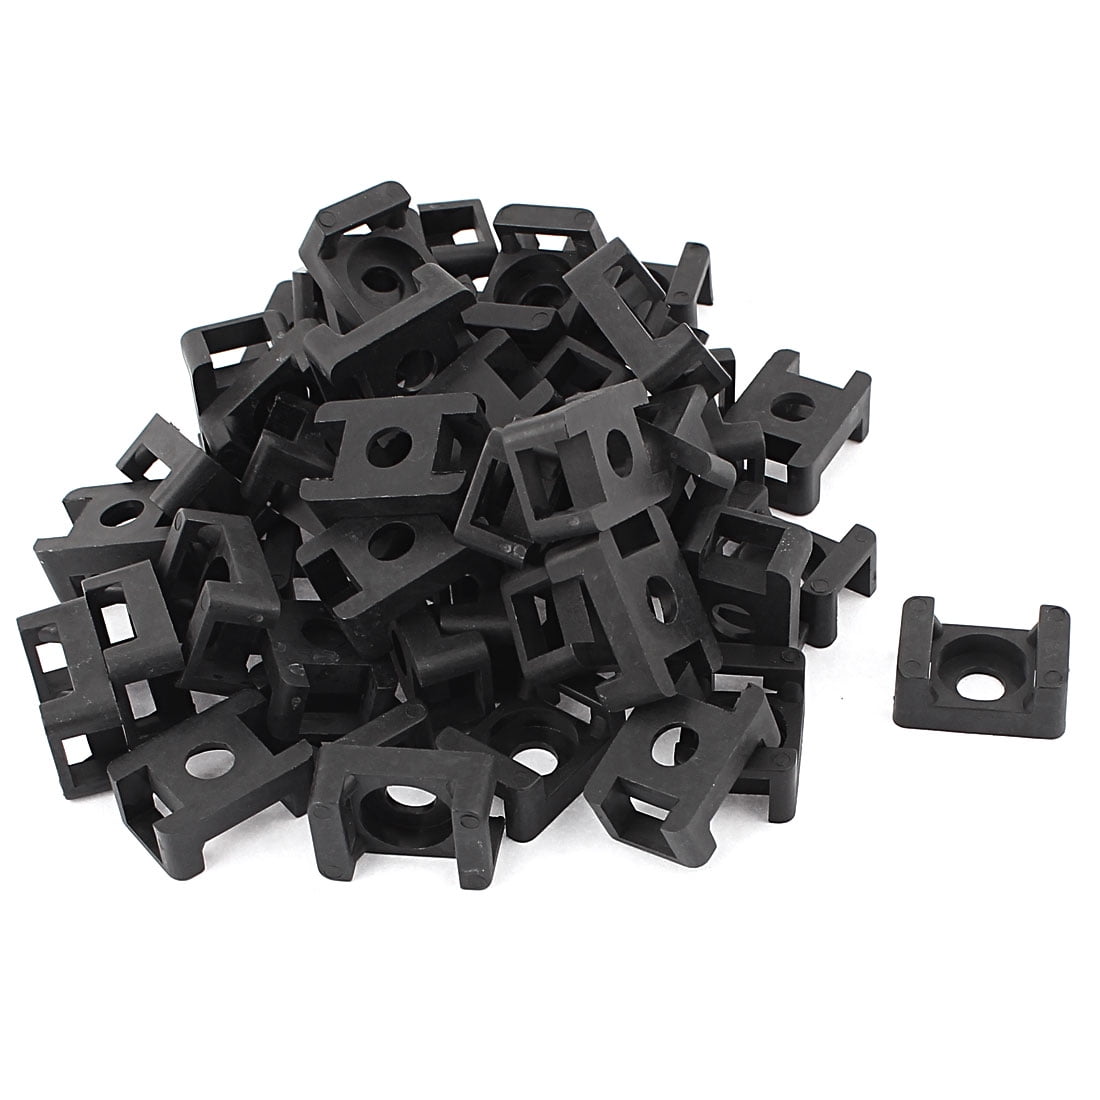 50Pcs Tie Mount Wire Cable Saddle Holder Screw Clamps Fixing Mounting Base Clips 